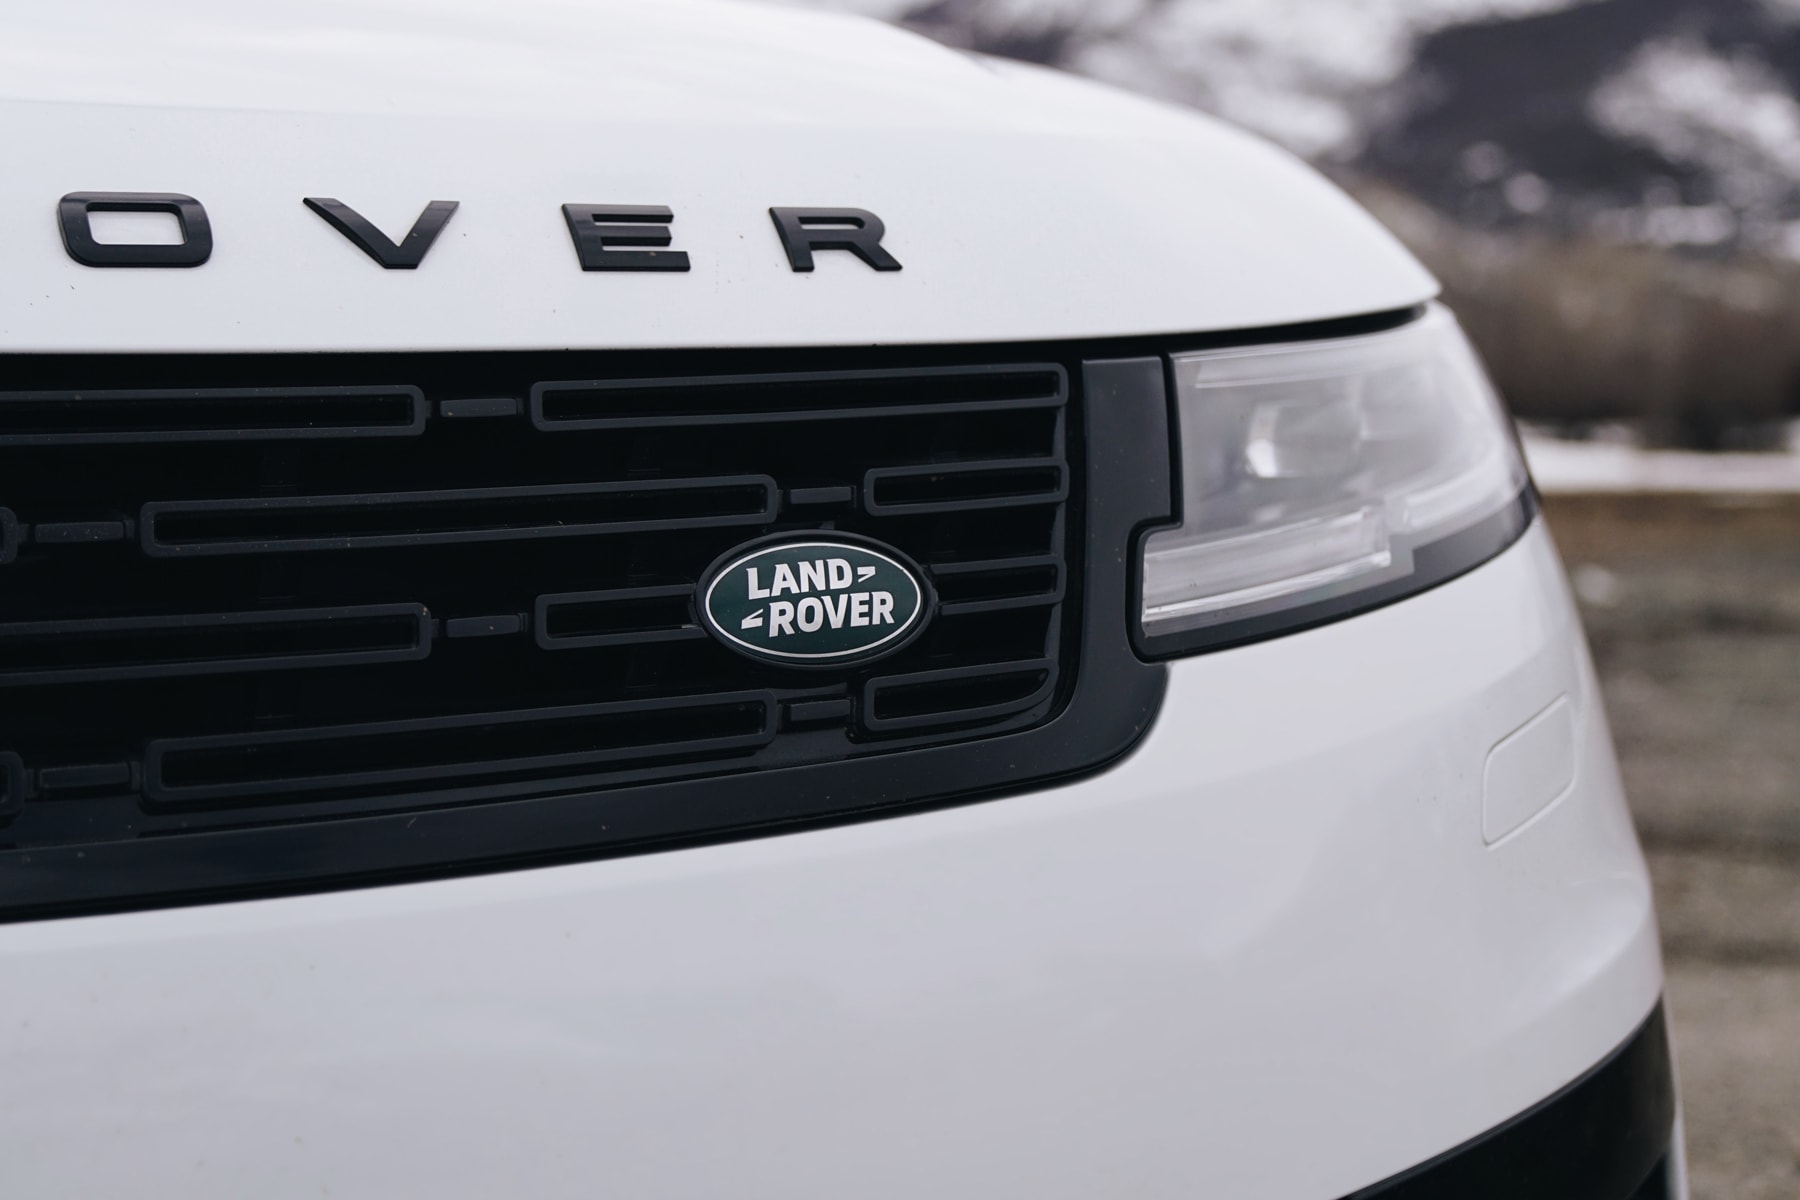 Range Rover Sport Park City Edition Photos and Review Closer Look Land Rover SUV Utah